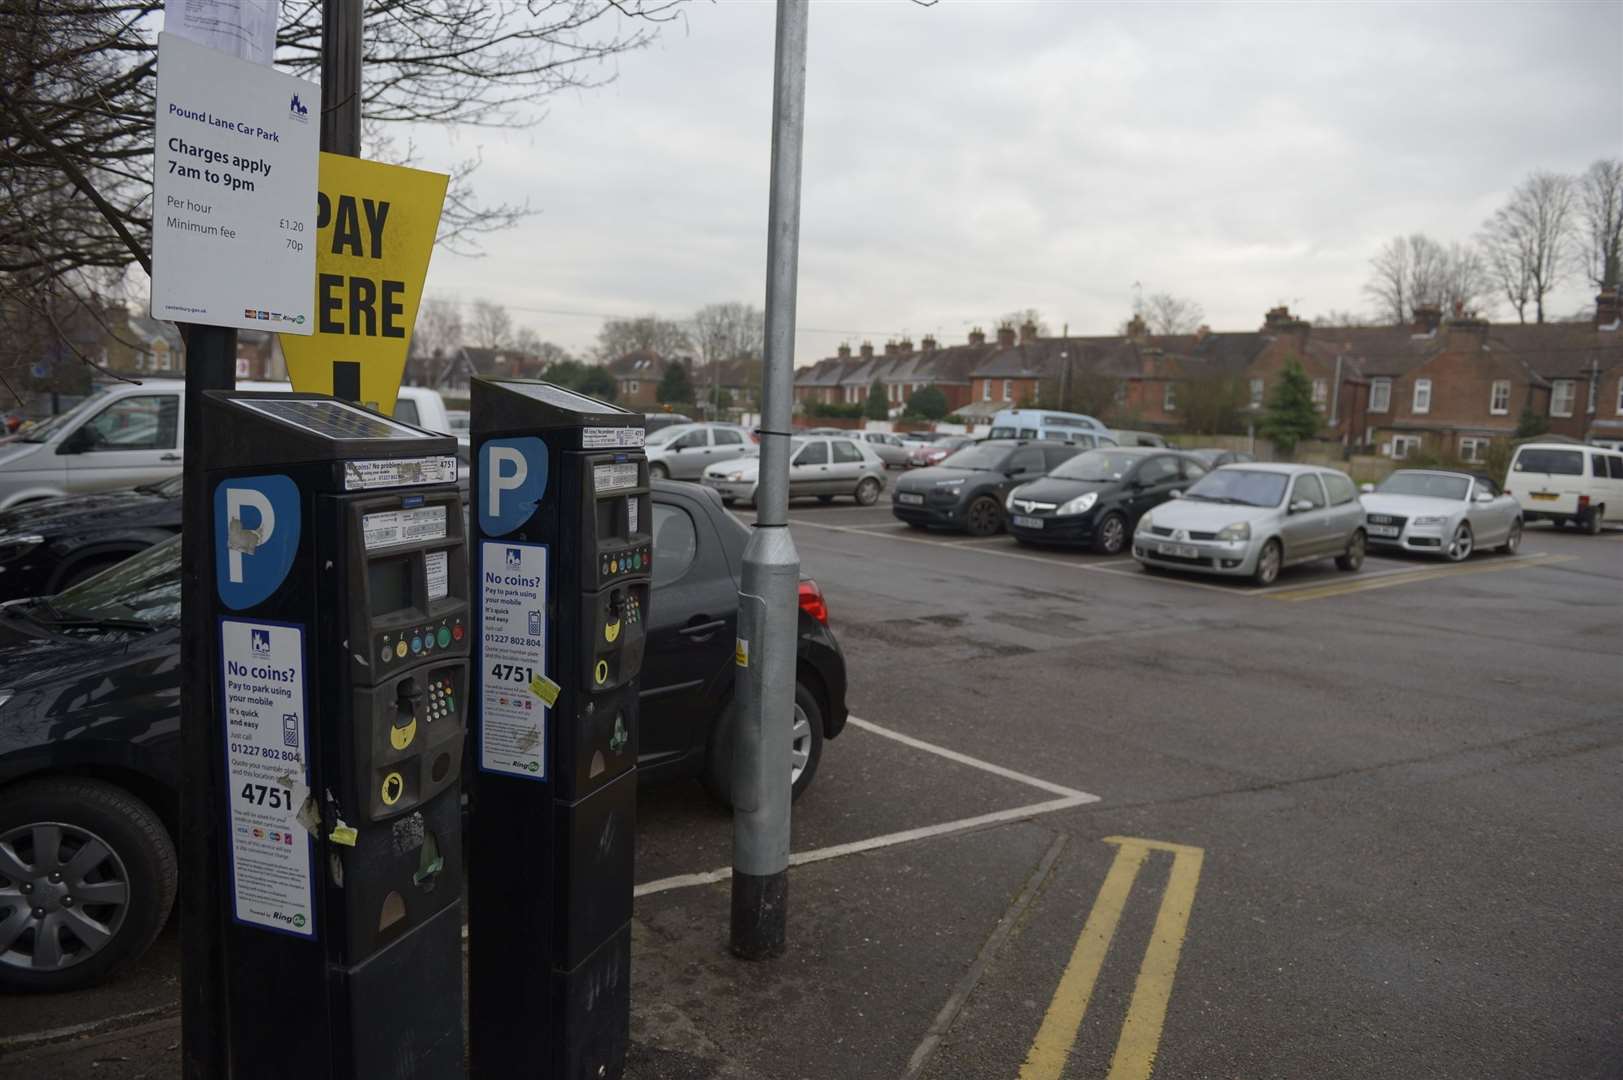 The Pound Lane car park will remain open